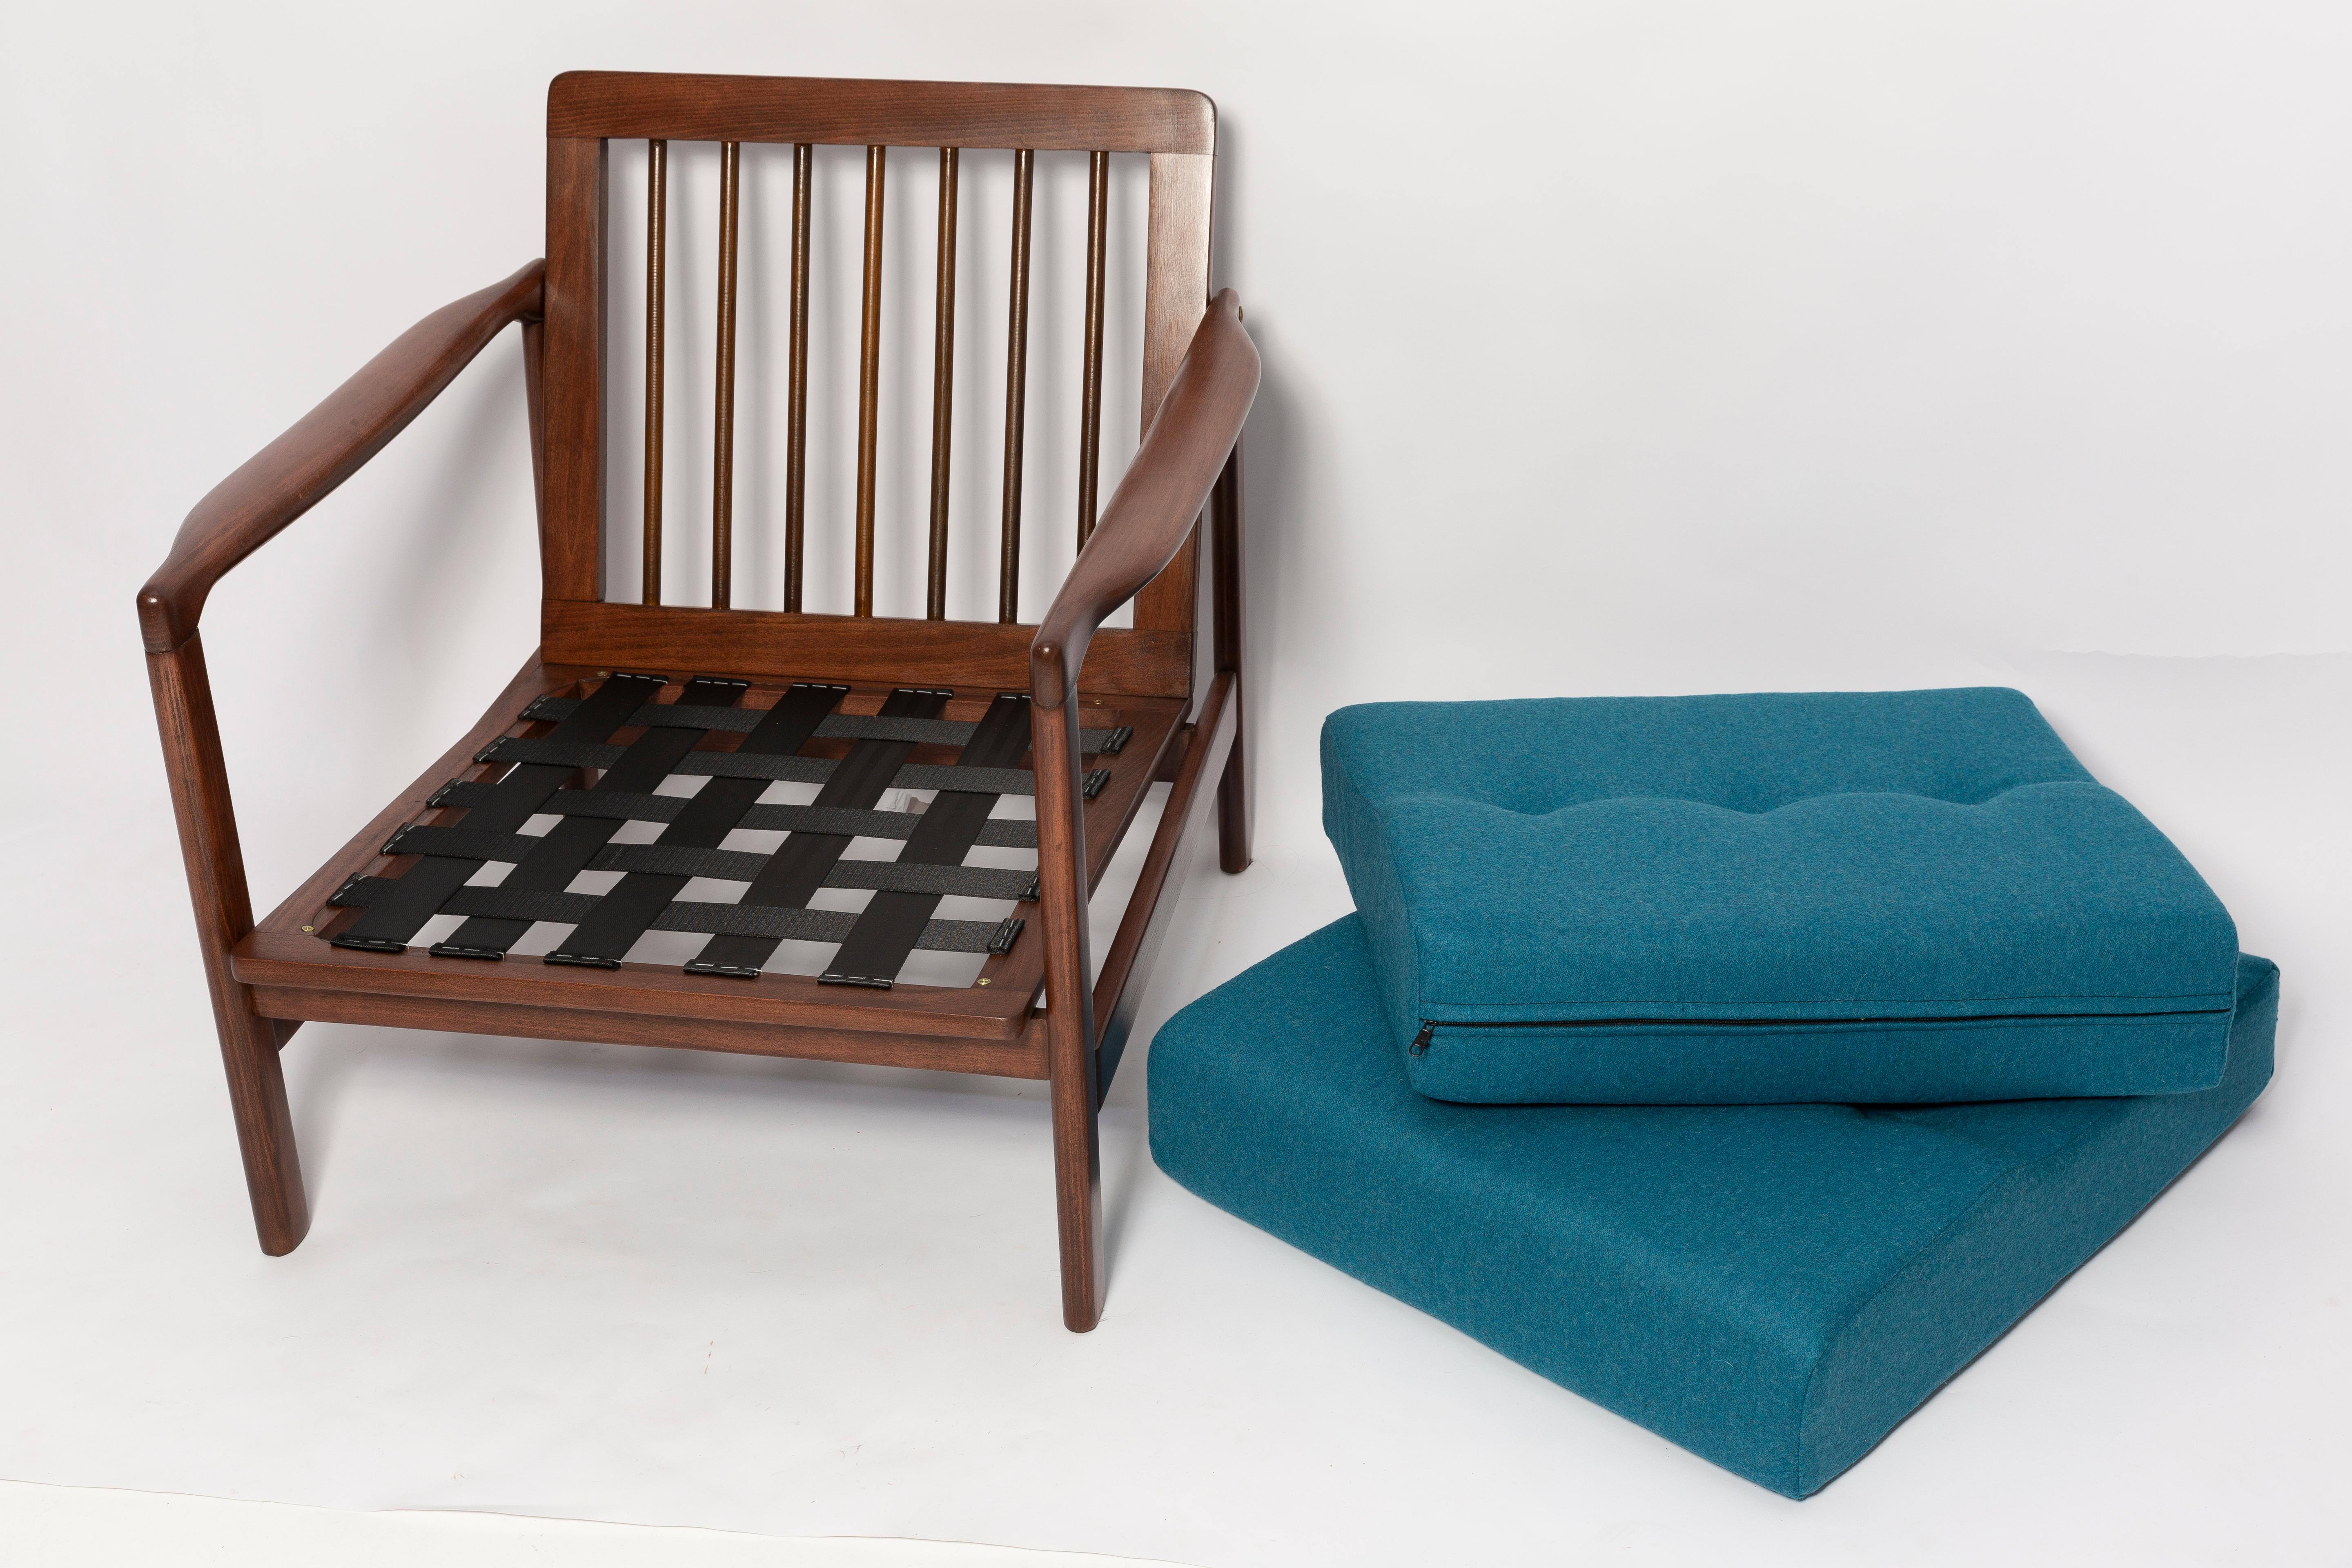 Pair of Mid Century Armchairs and Coffee Table, Zenon Baczyk, Europe, 1960s For Sale 7